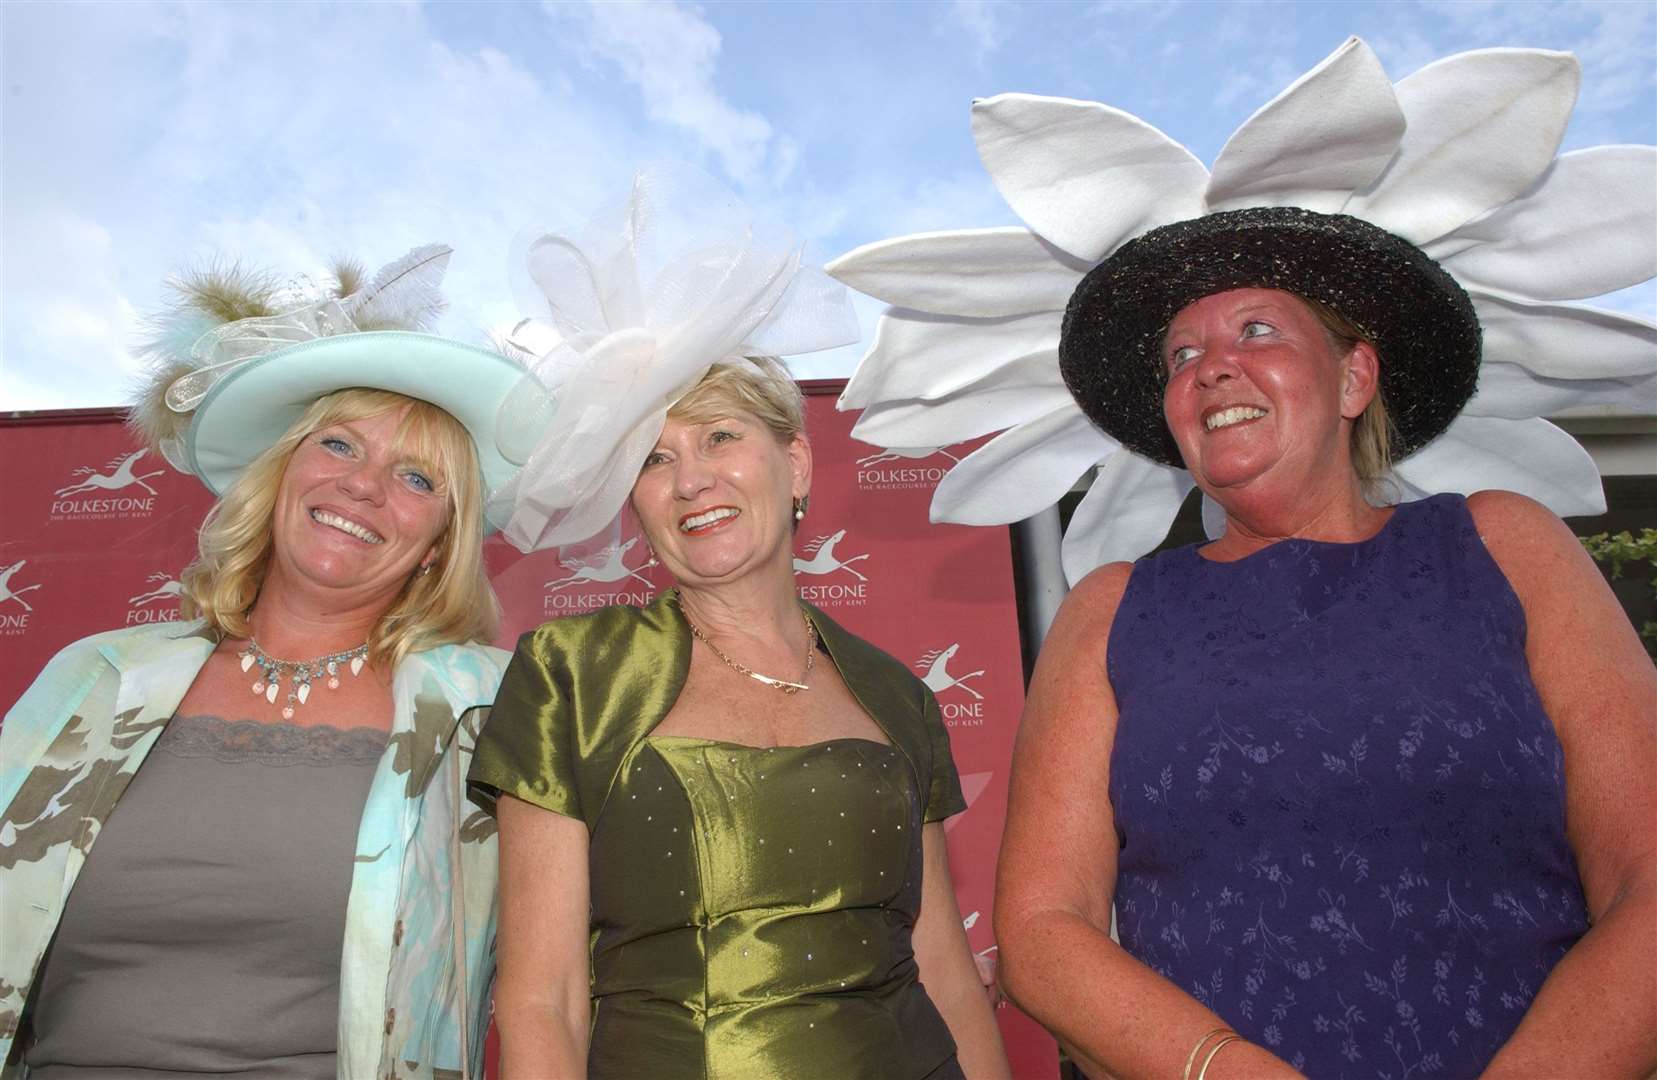 Hat winners, from left, Cheryl Askew, Andrea Sampson and Clare Wiltshire in August 2009